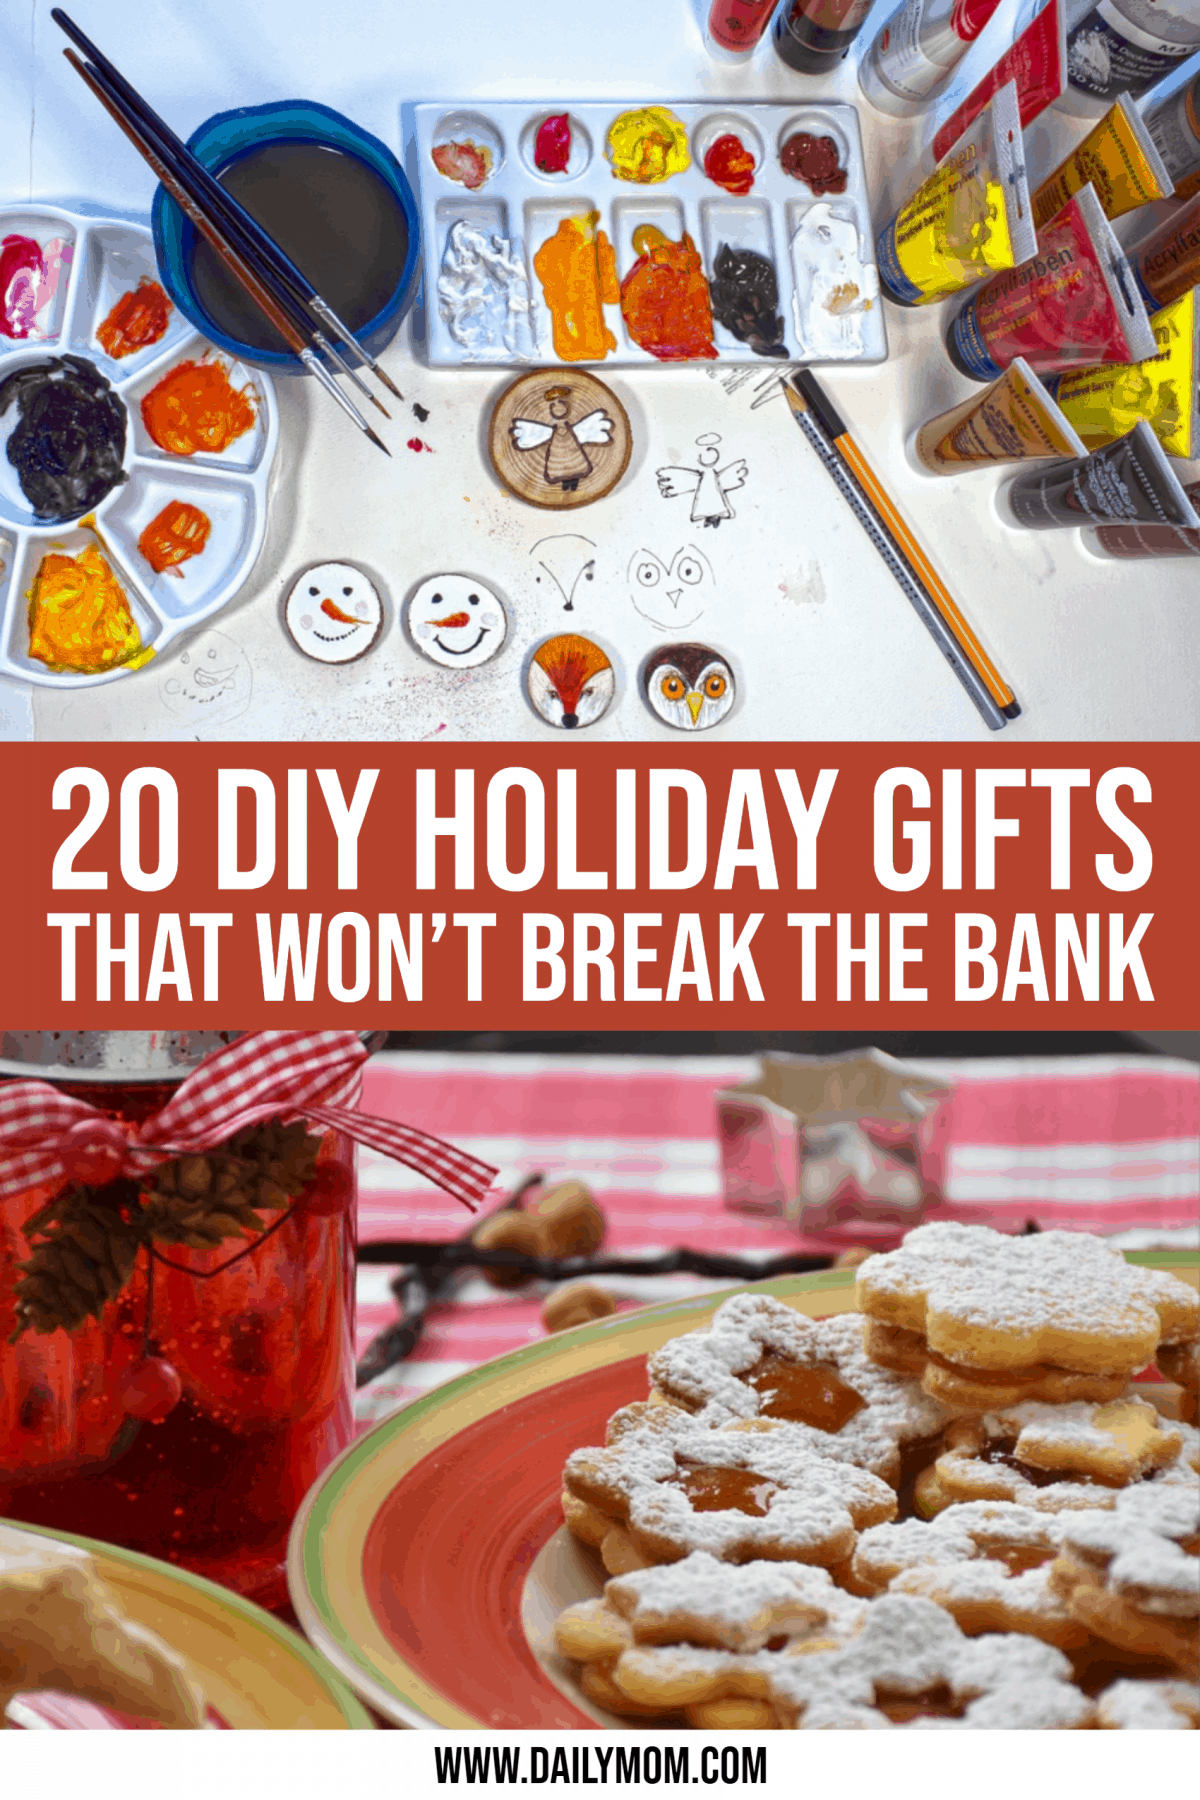 20 Diy Holiday Gifts That Won’t Break The Bank This Year {2019}